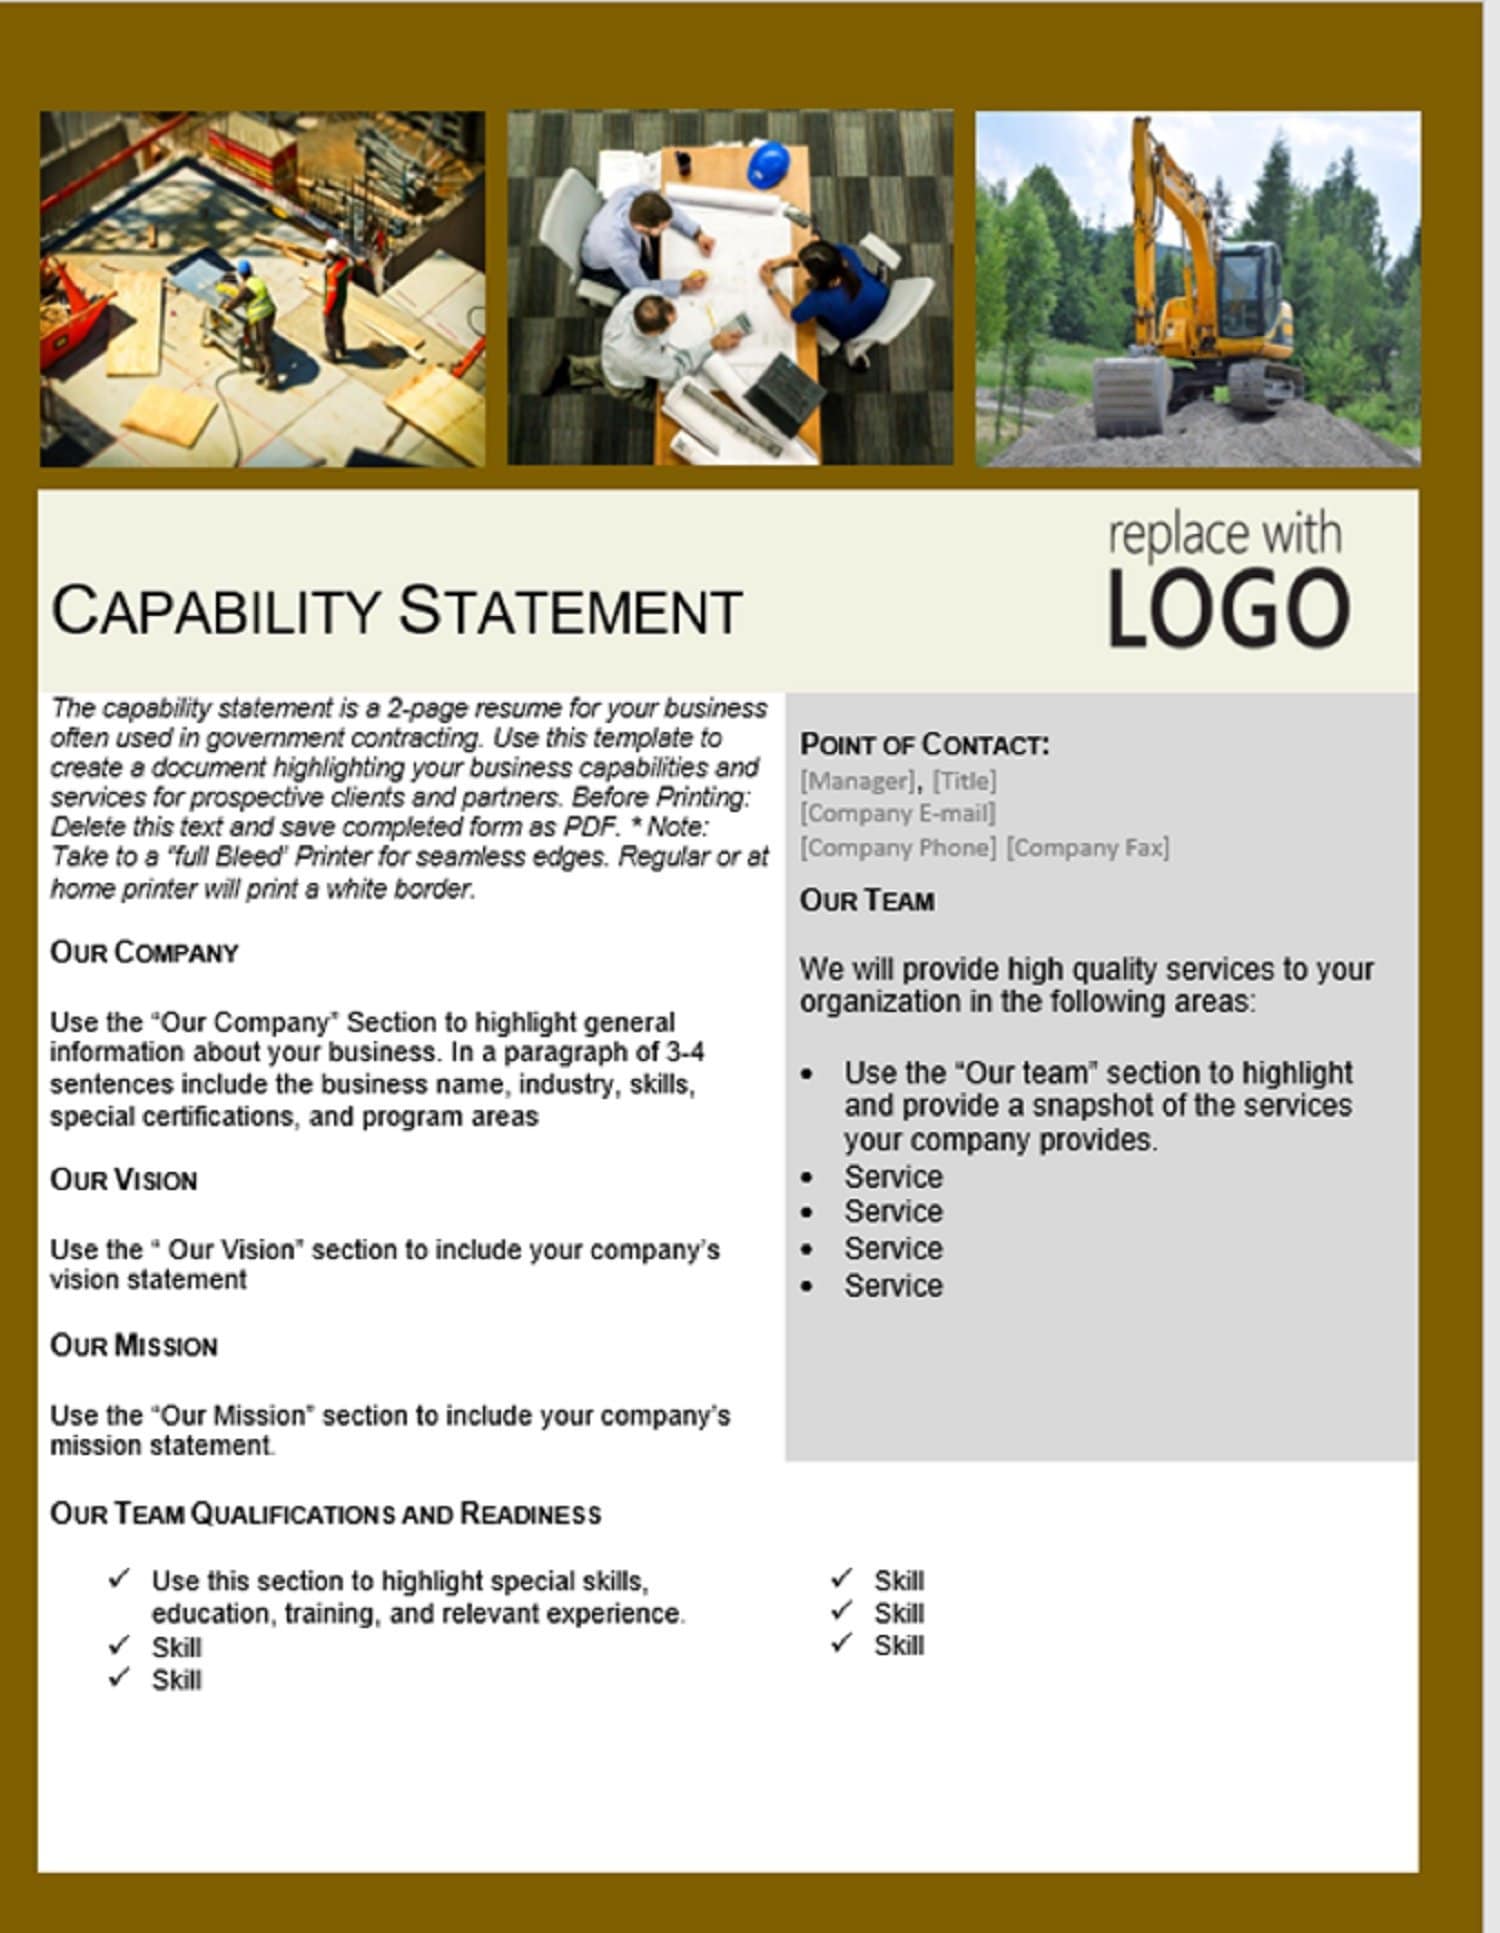 brown-business-capability-statement-template-etsy